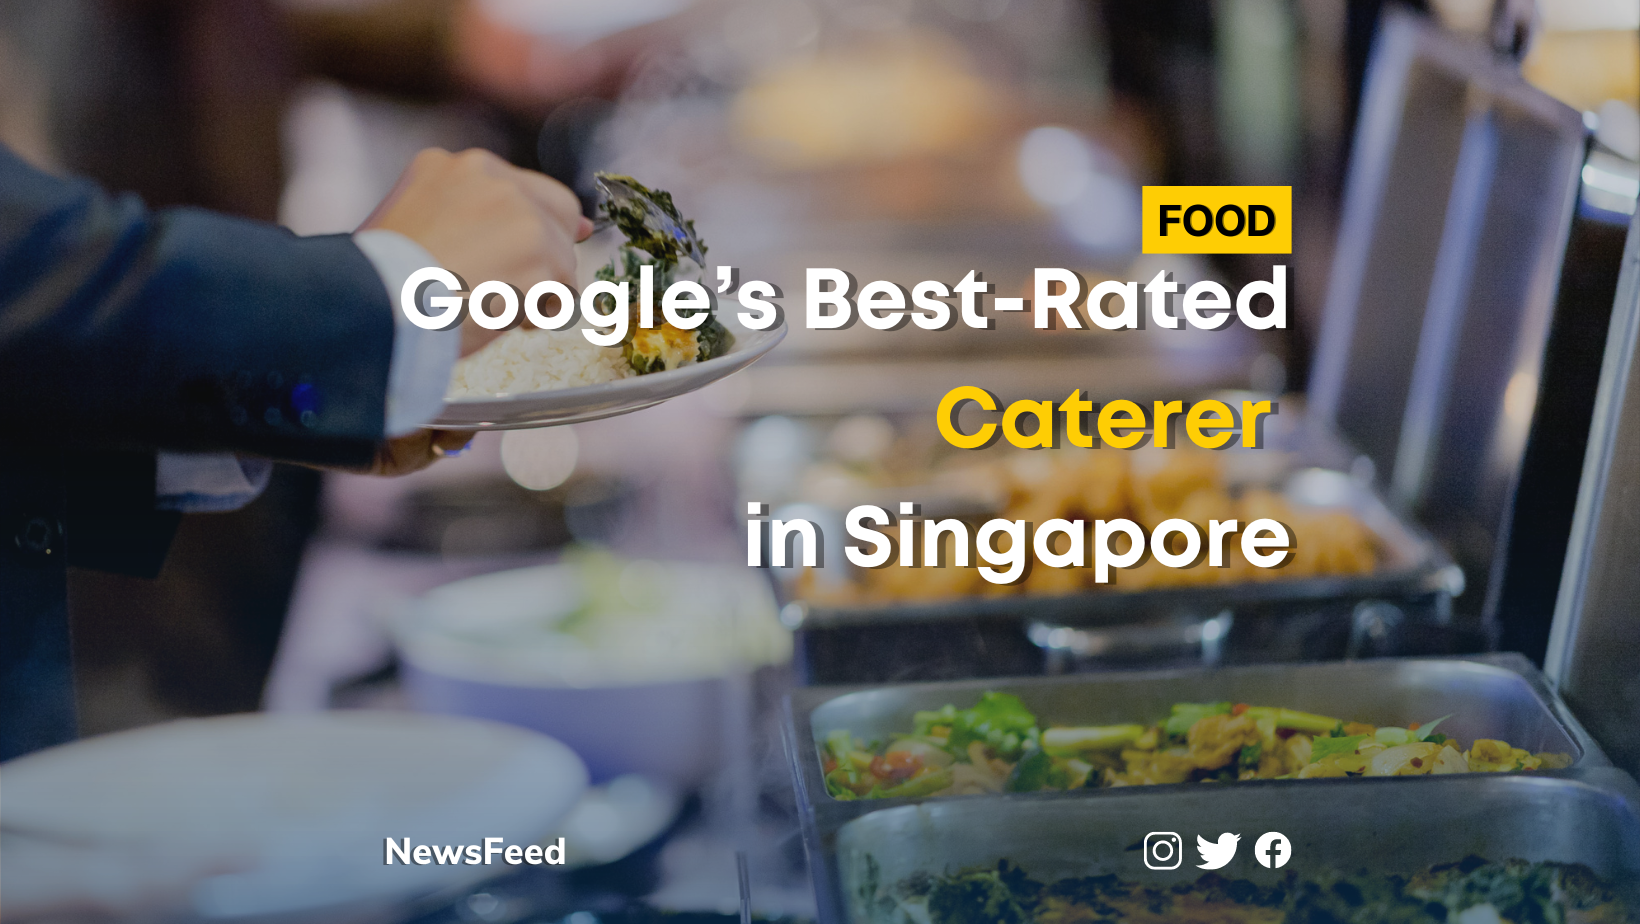 Google’s Best-Rated Caterer in Singapore